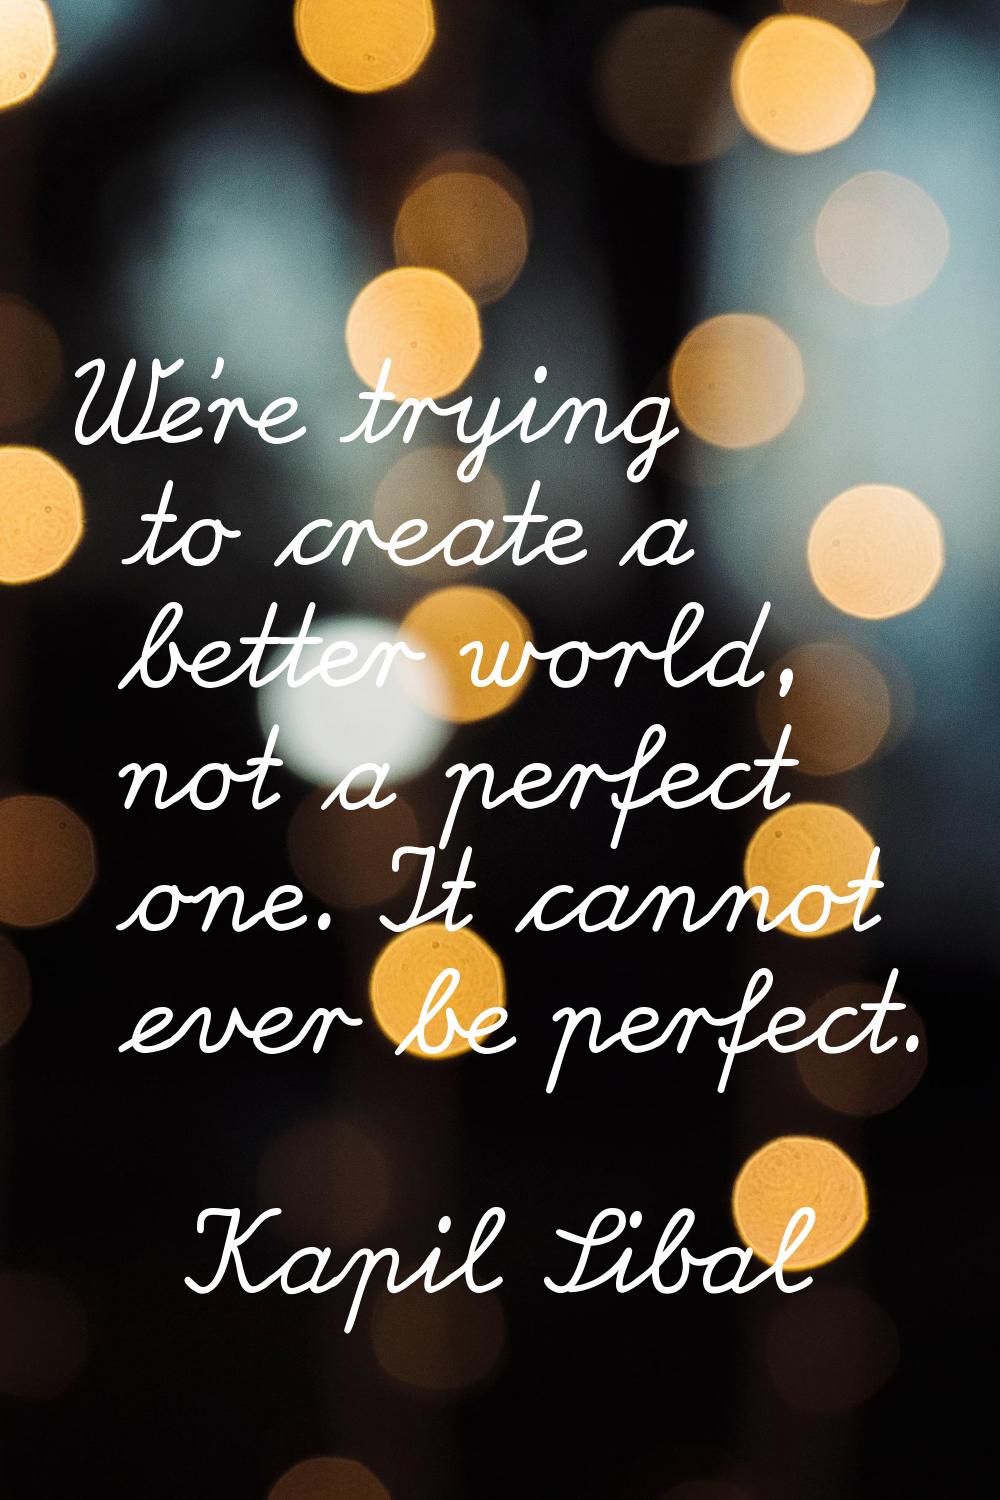 We're trying to create a better world, not a perfect one. It cannot ever be perfect.